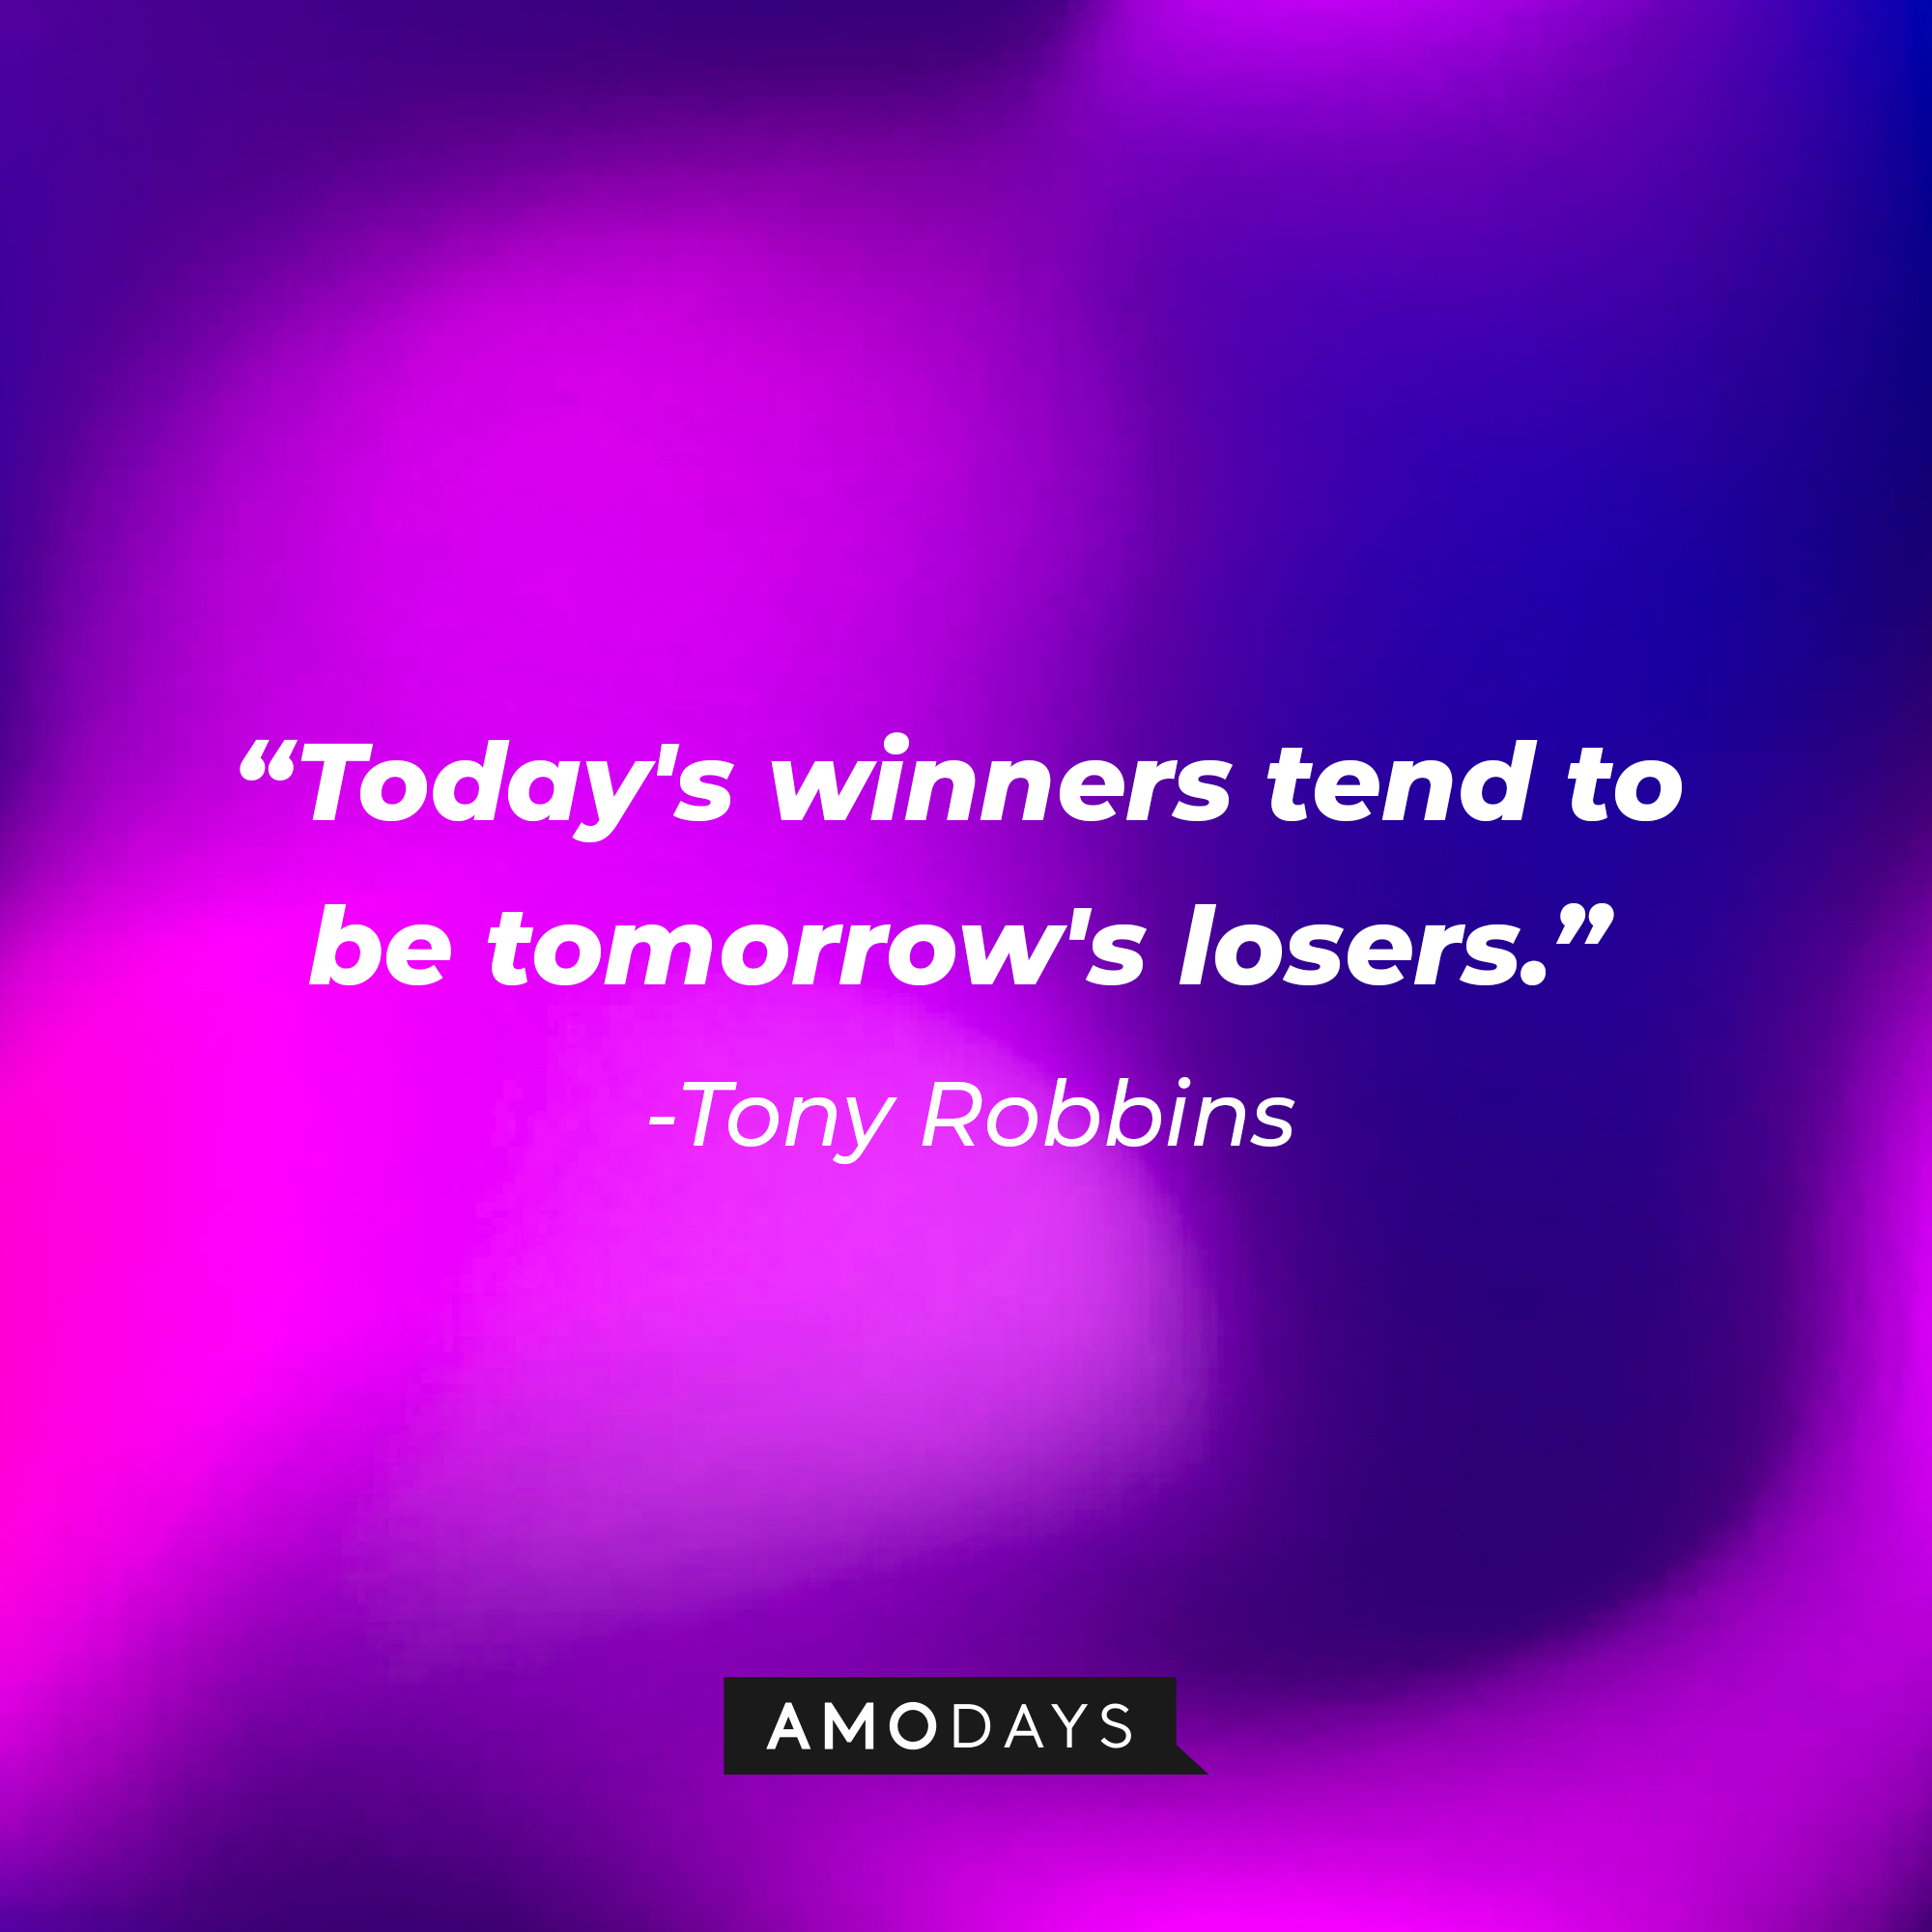 Tony Robbins’ quote: "Today's winners tend to be tomorrow's losers."  | Image: Amodays